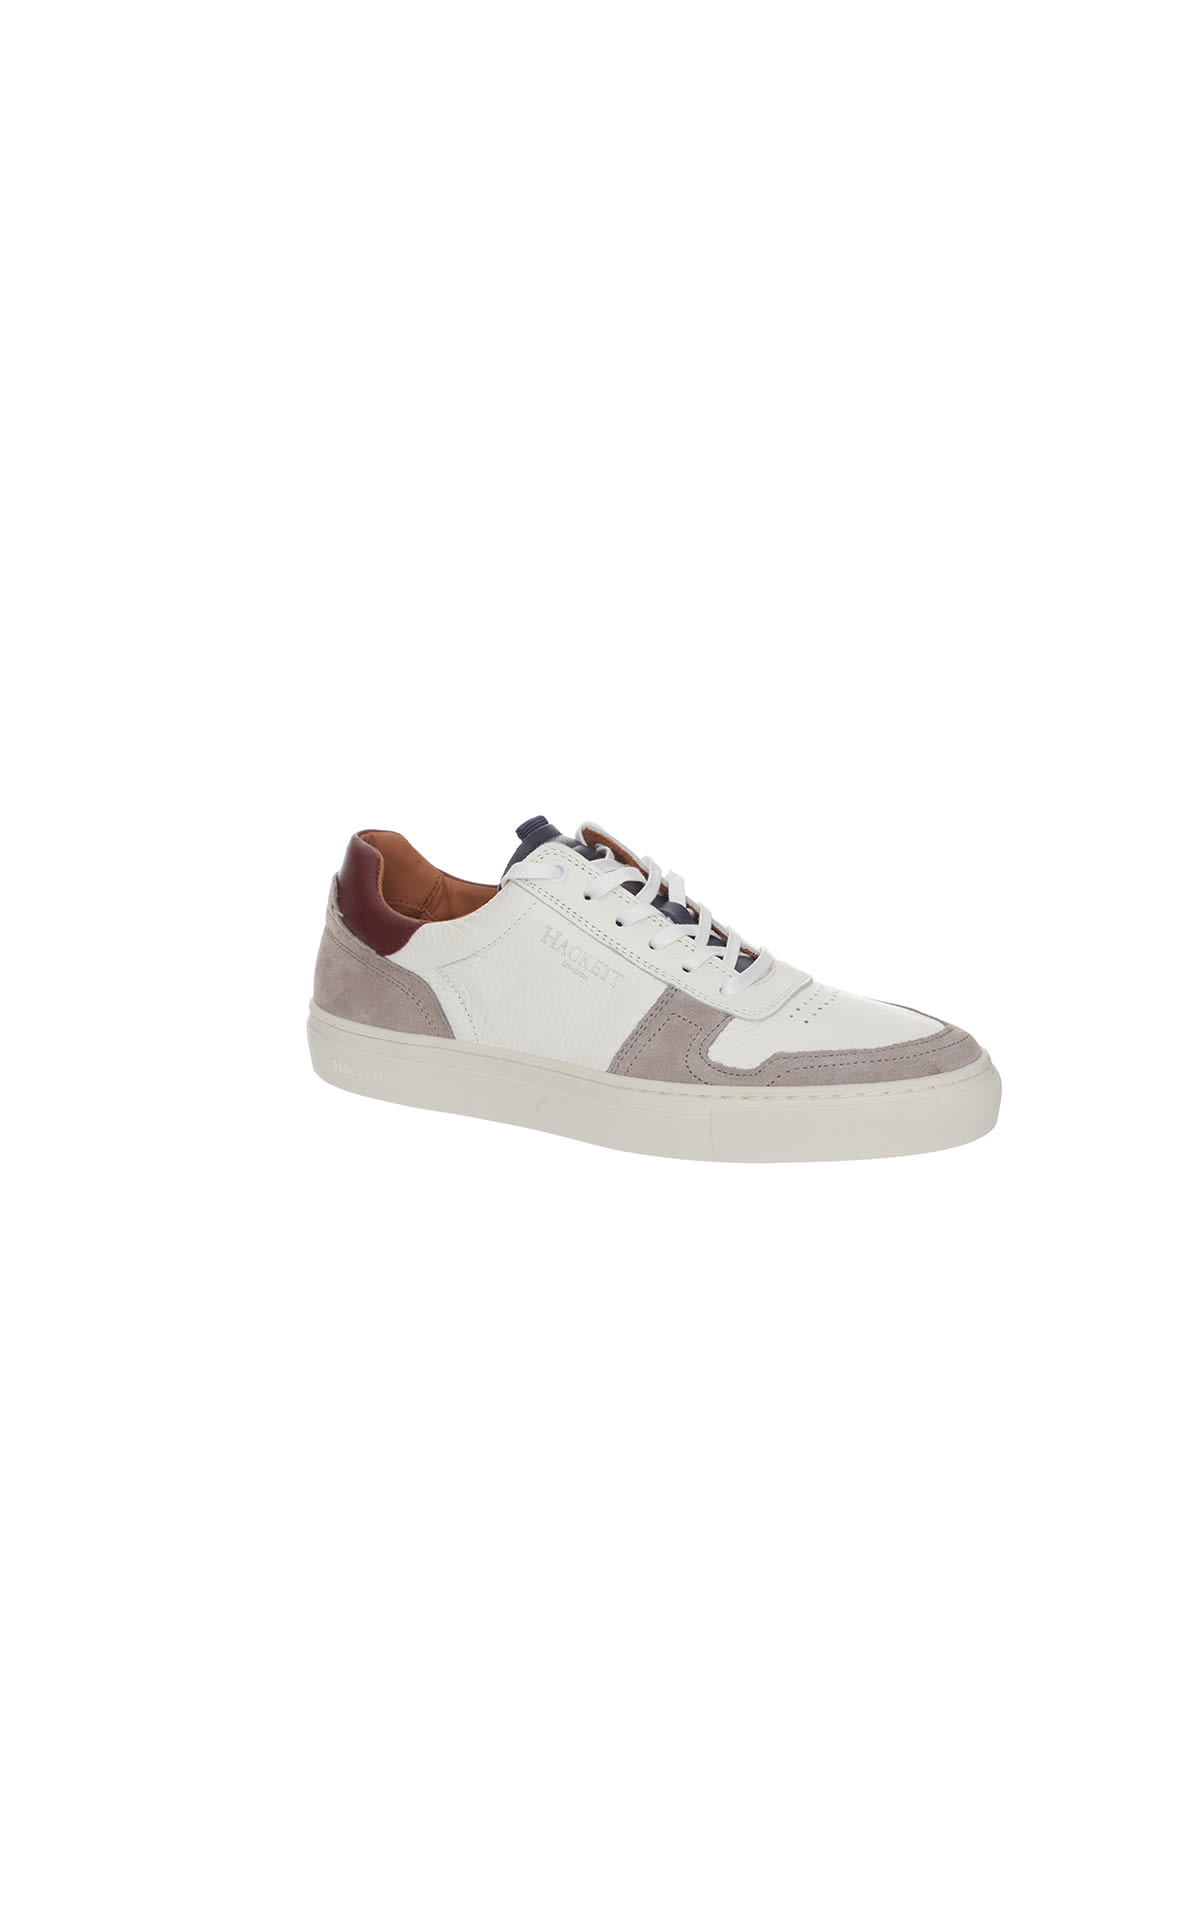 Hackett Loon sneakers from Bicester Village